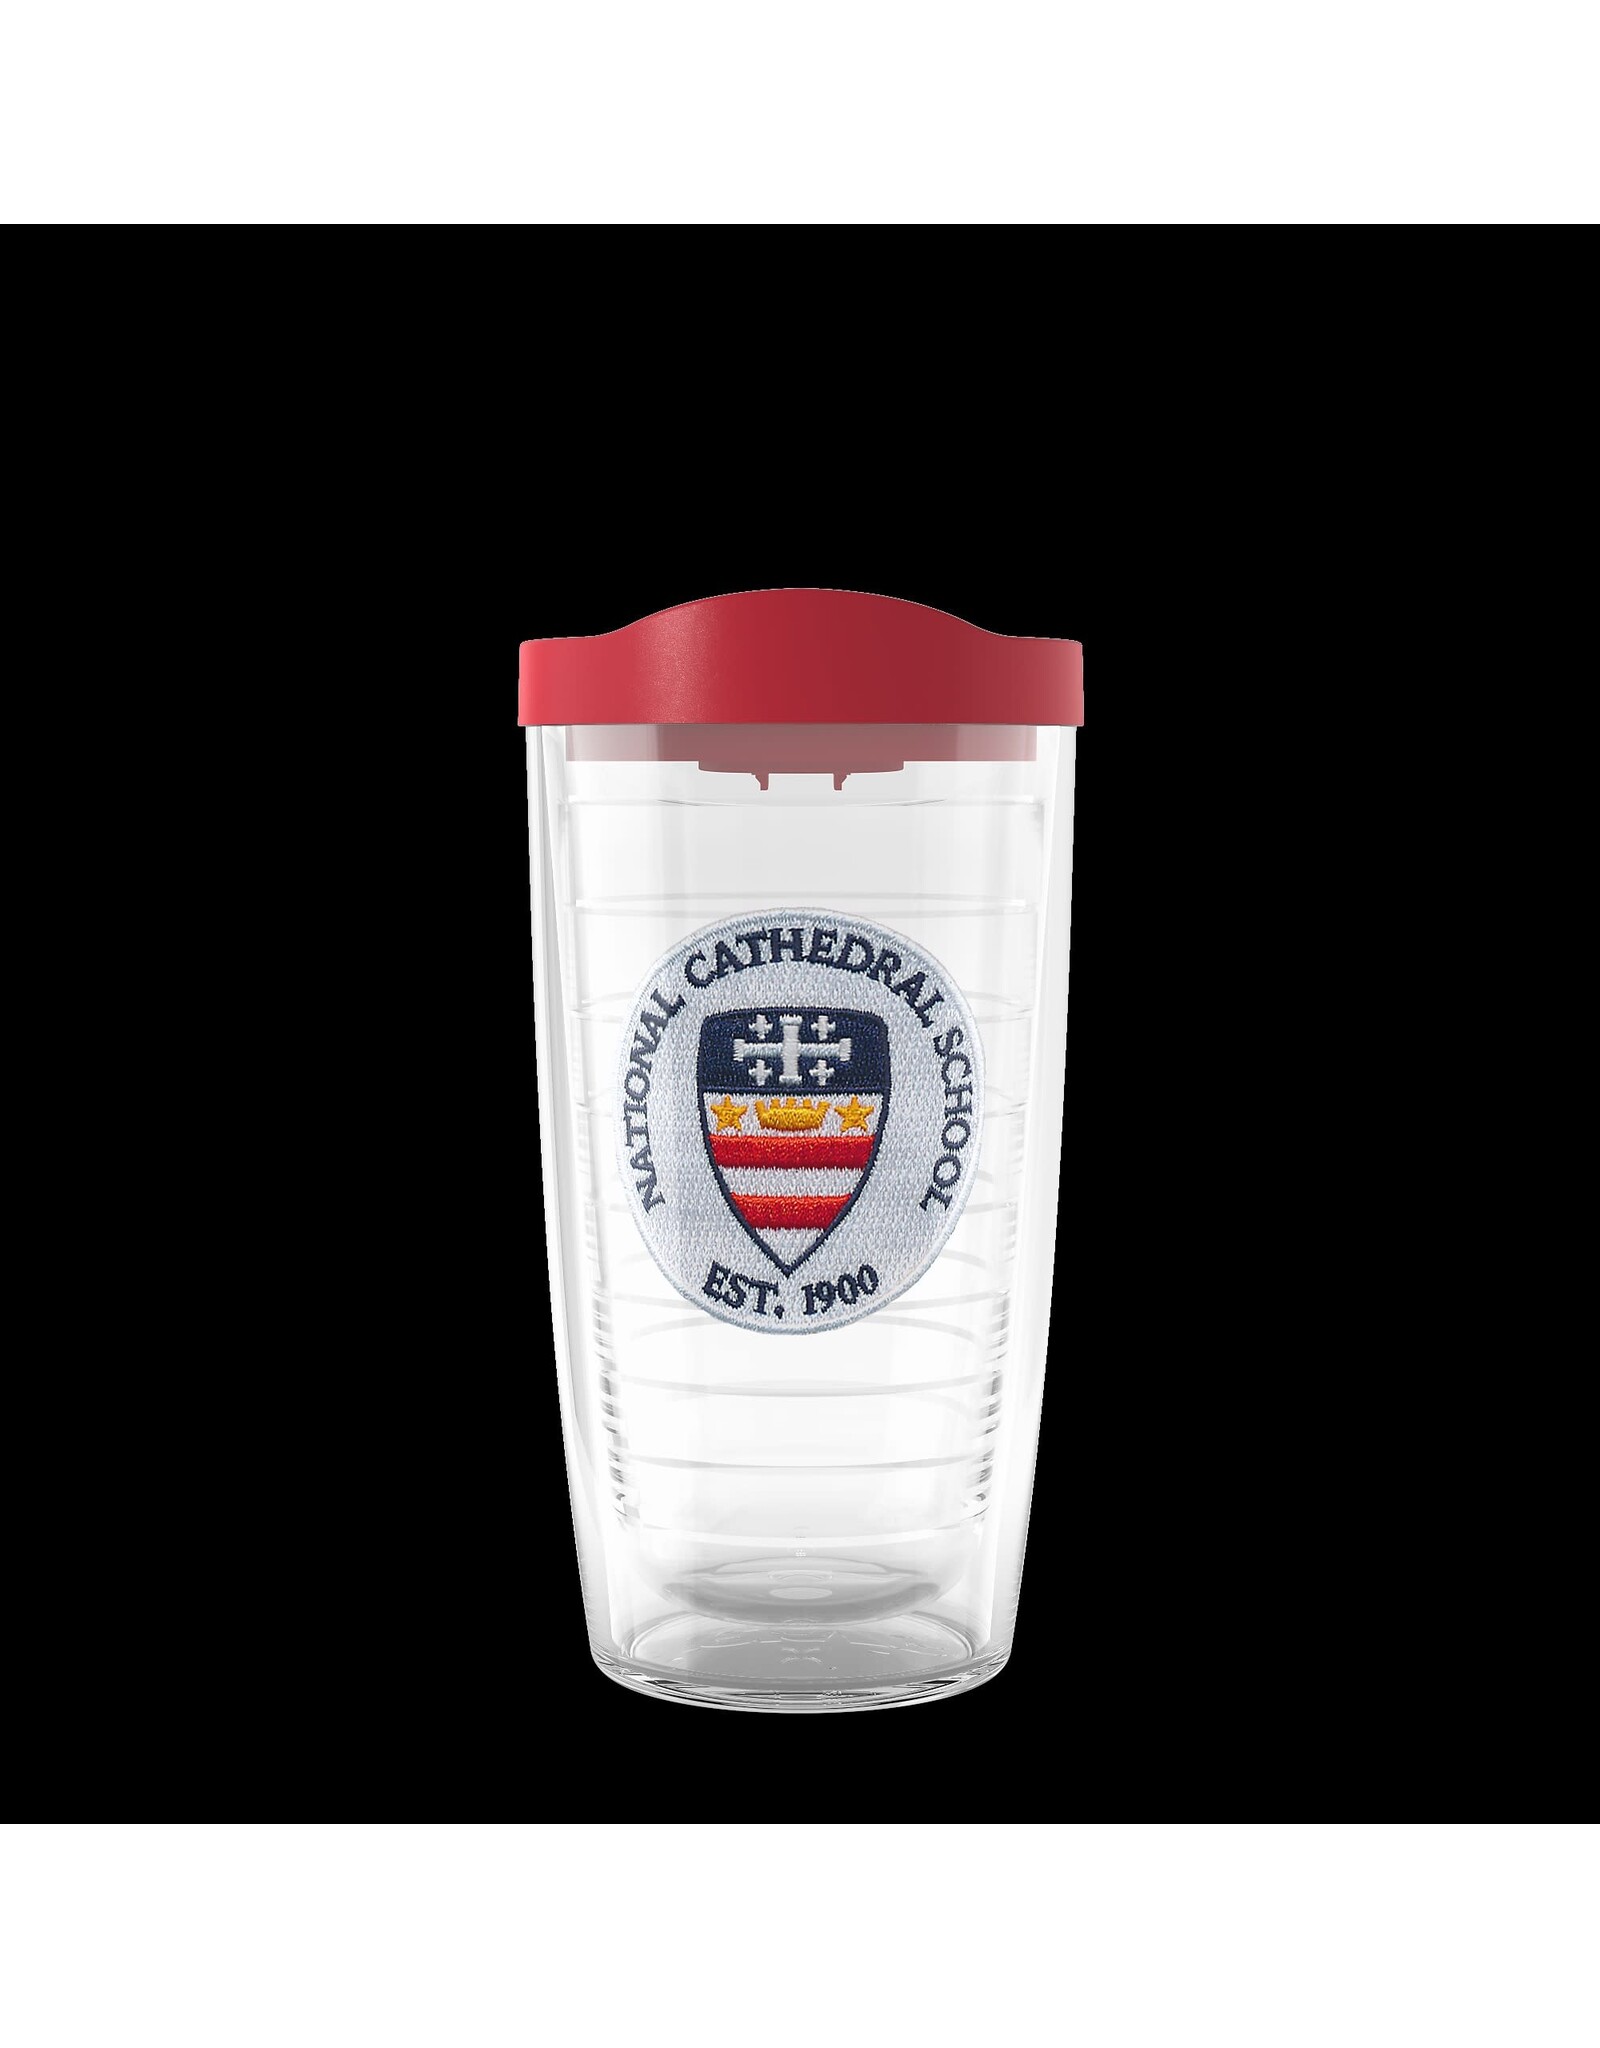 Tervis Tumbler Red Lid 16oz